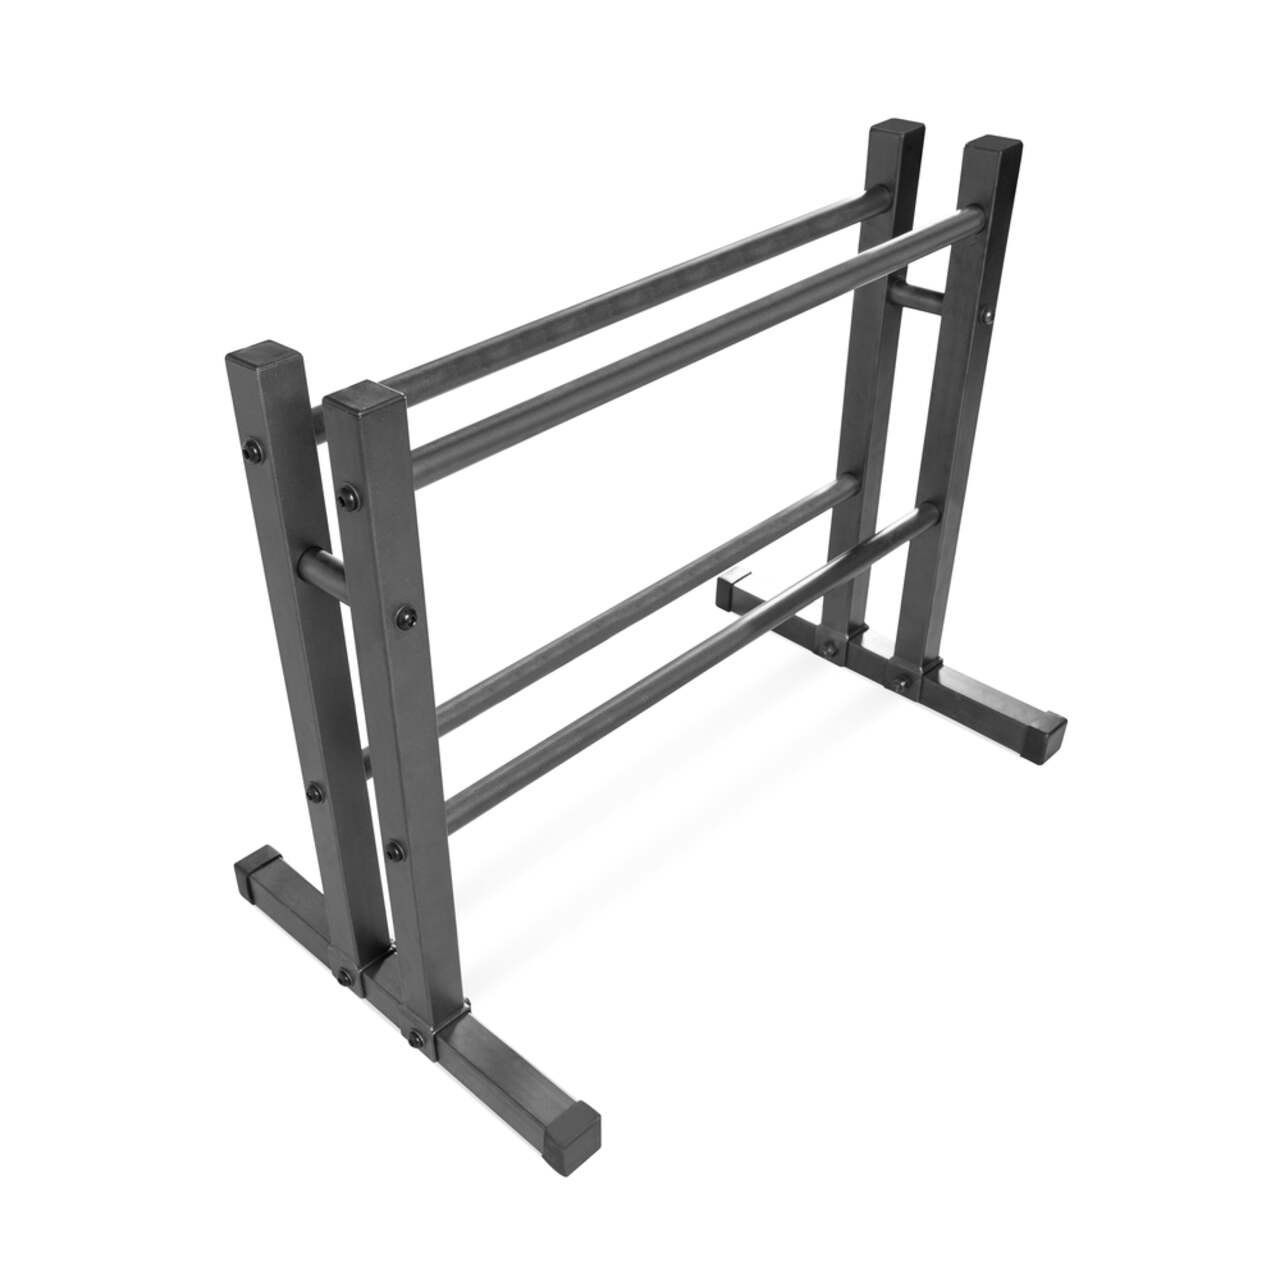 Cap Barbell Strength FID Adjustable Utility Weight Bench for Full